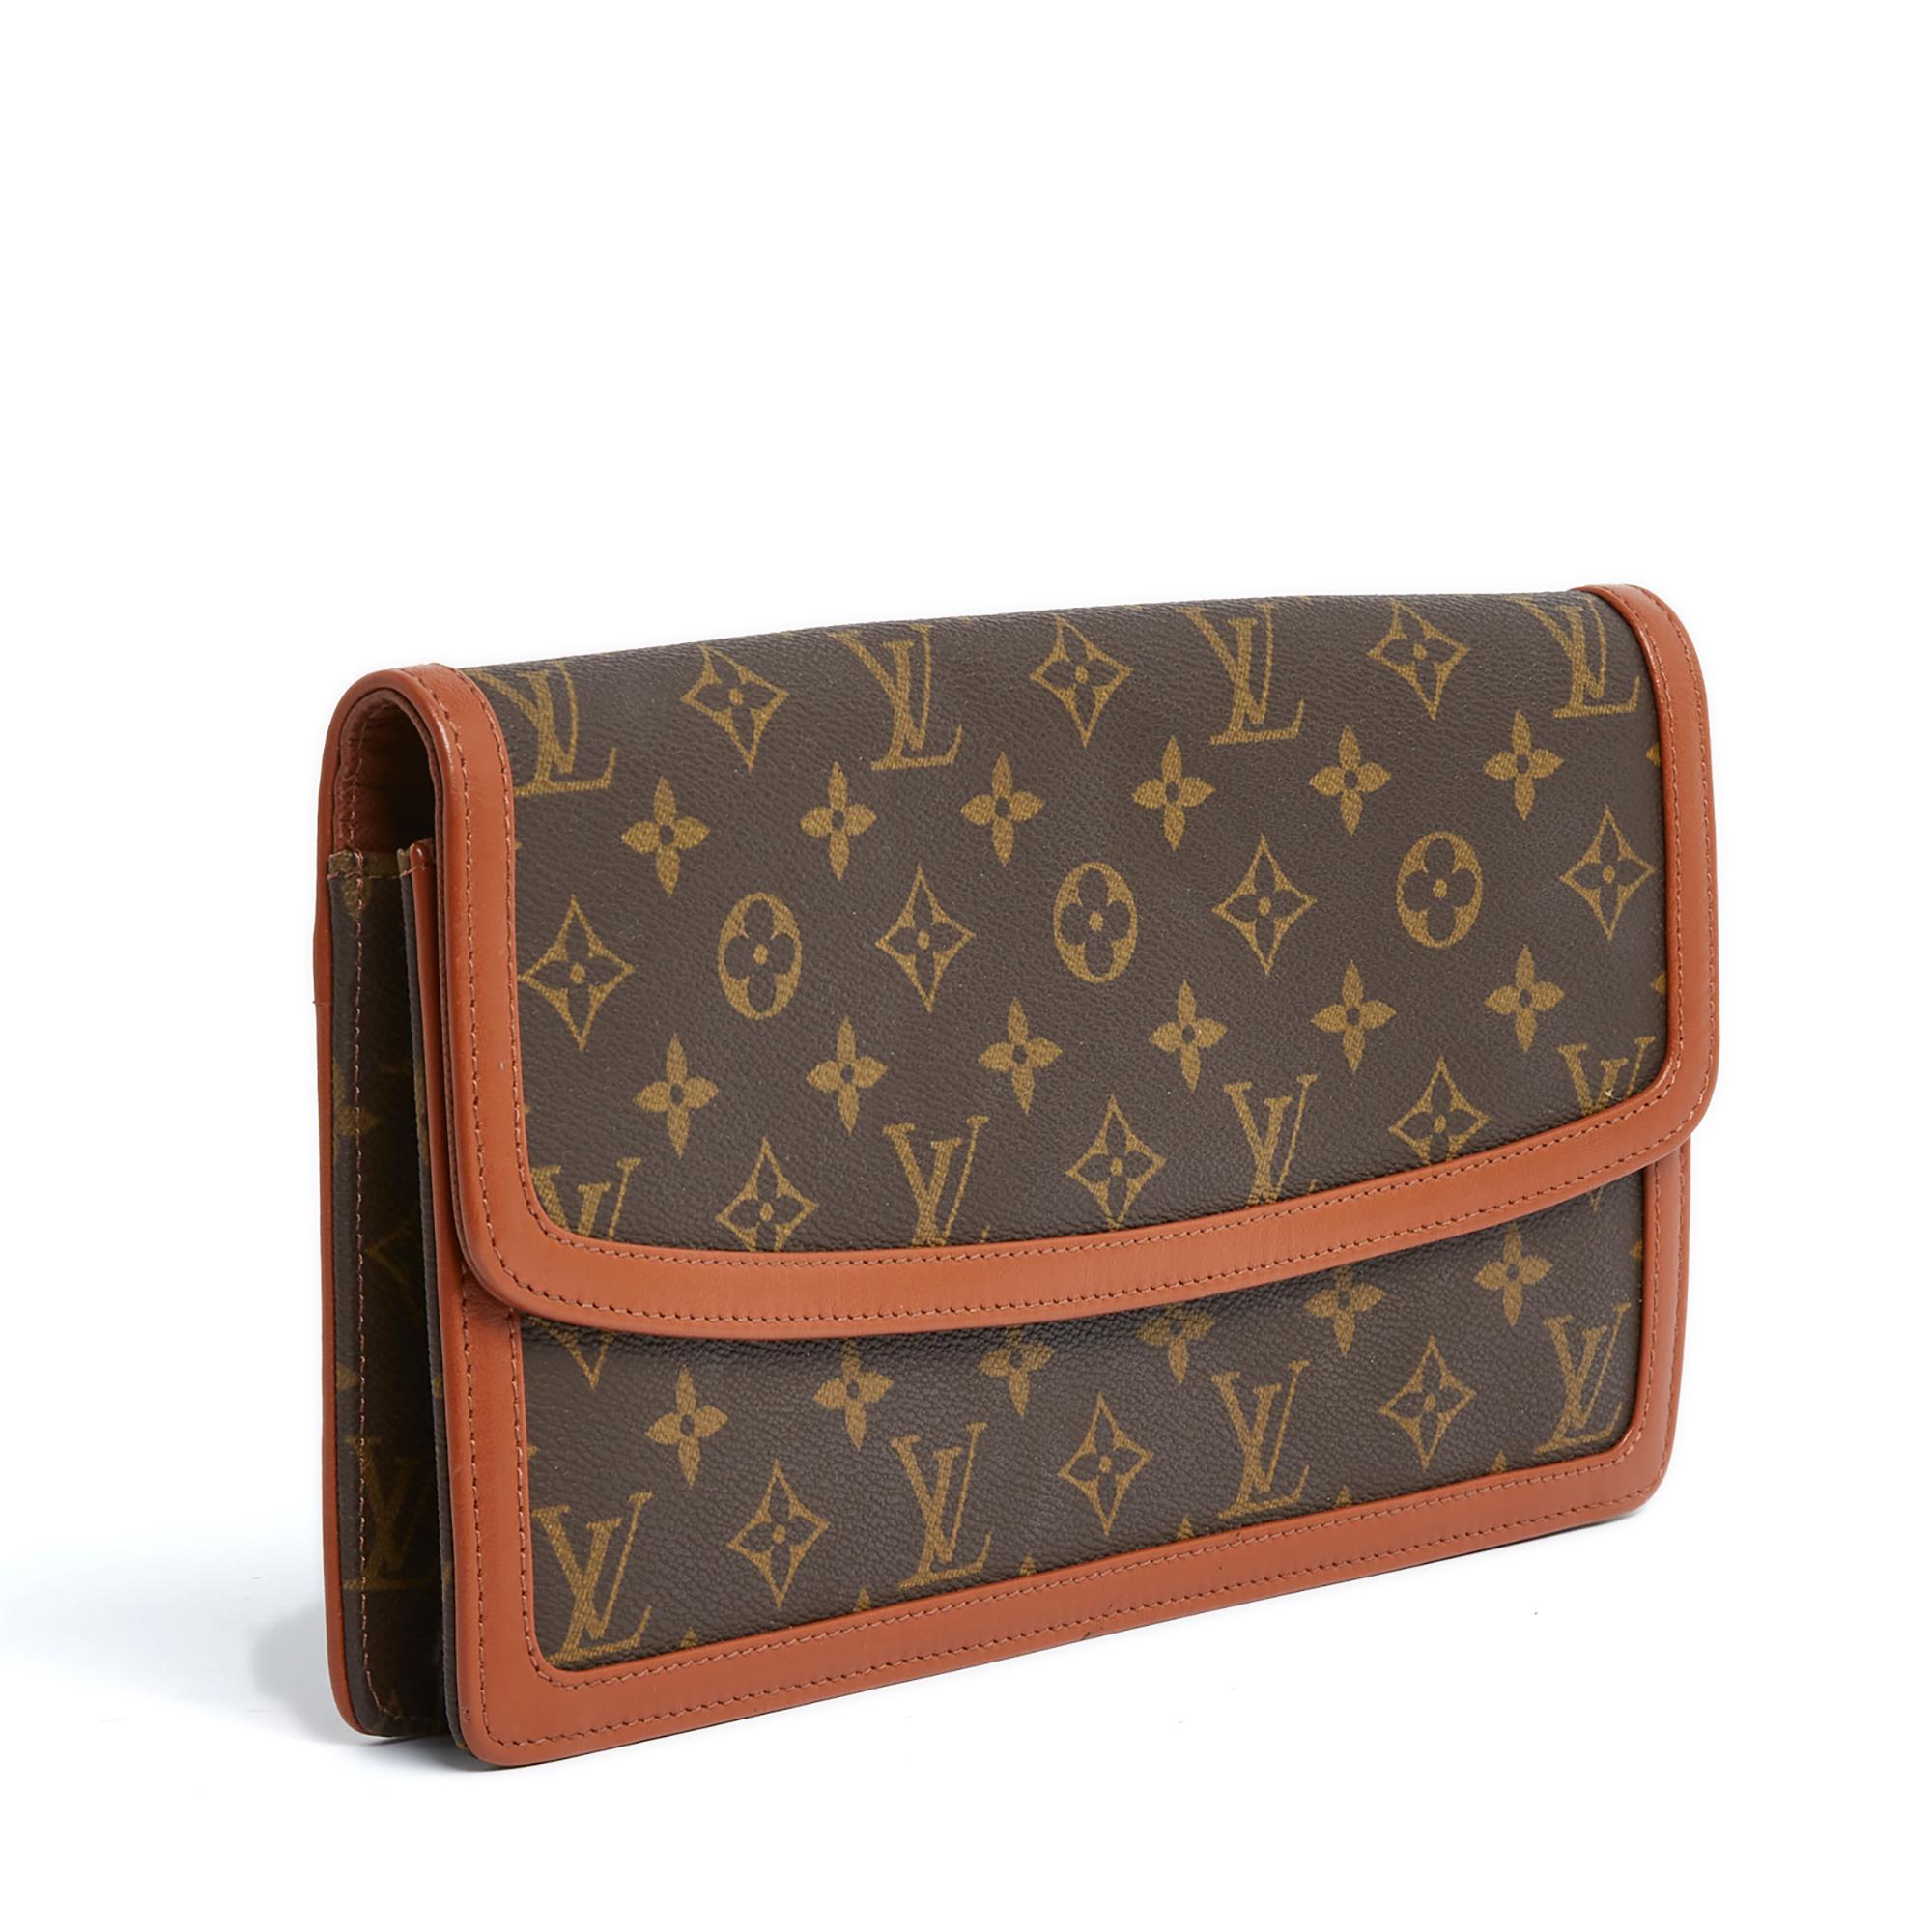 Louis Vuitton clutch circa 1990, Félicie style, in monogram canvas and tan leather, coordinated leather interior with one patch pocket and one zipped pocket, flap closed by pressure. Width 29.2 cm x height 16.2 cm x depth (empty) 3 cm. The cover is